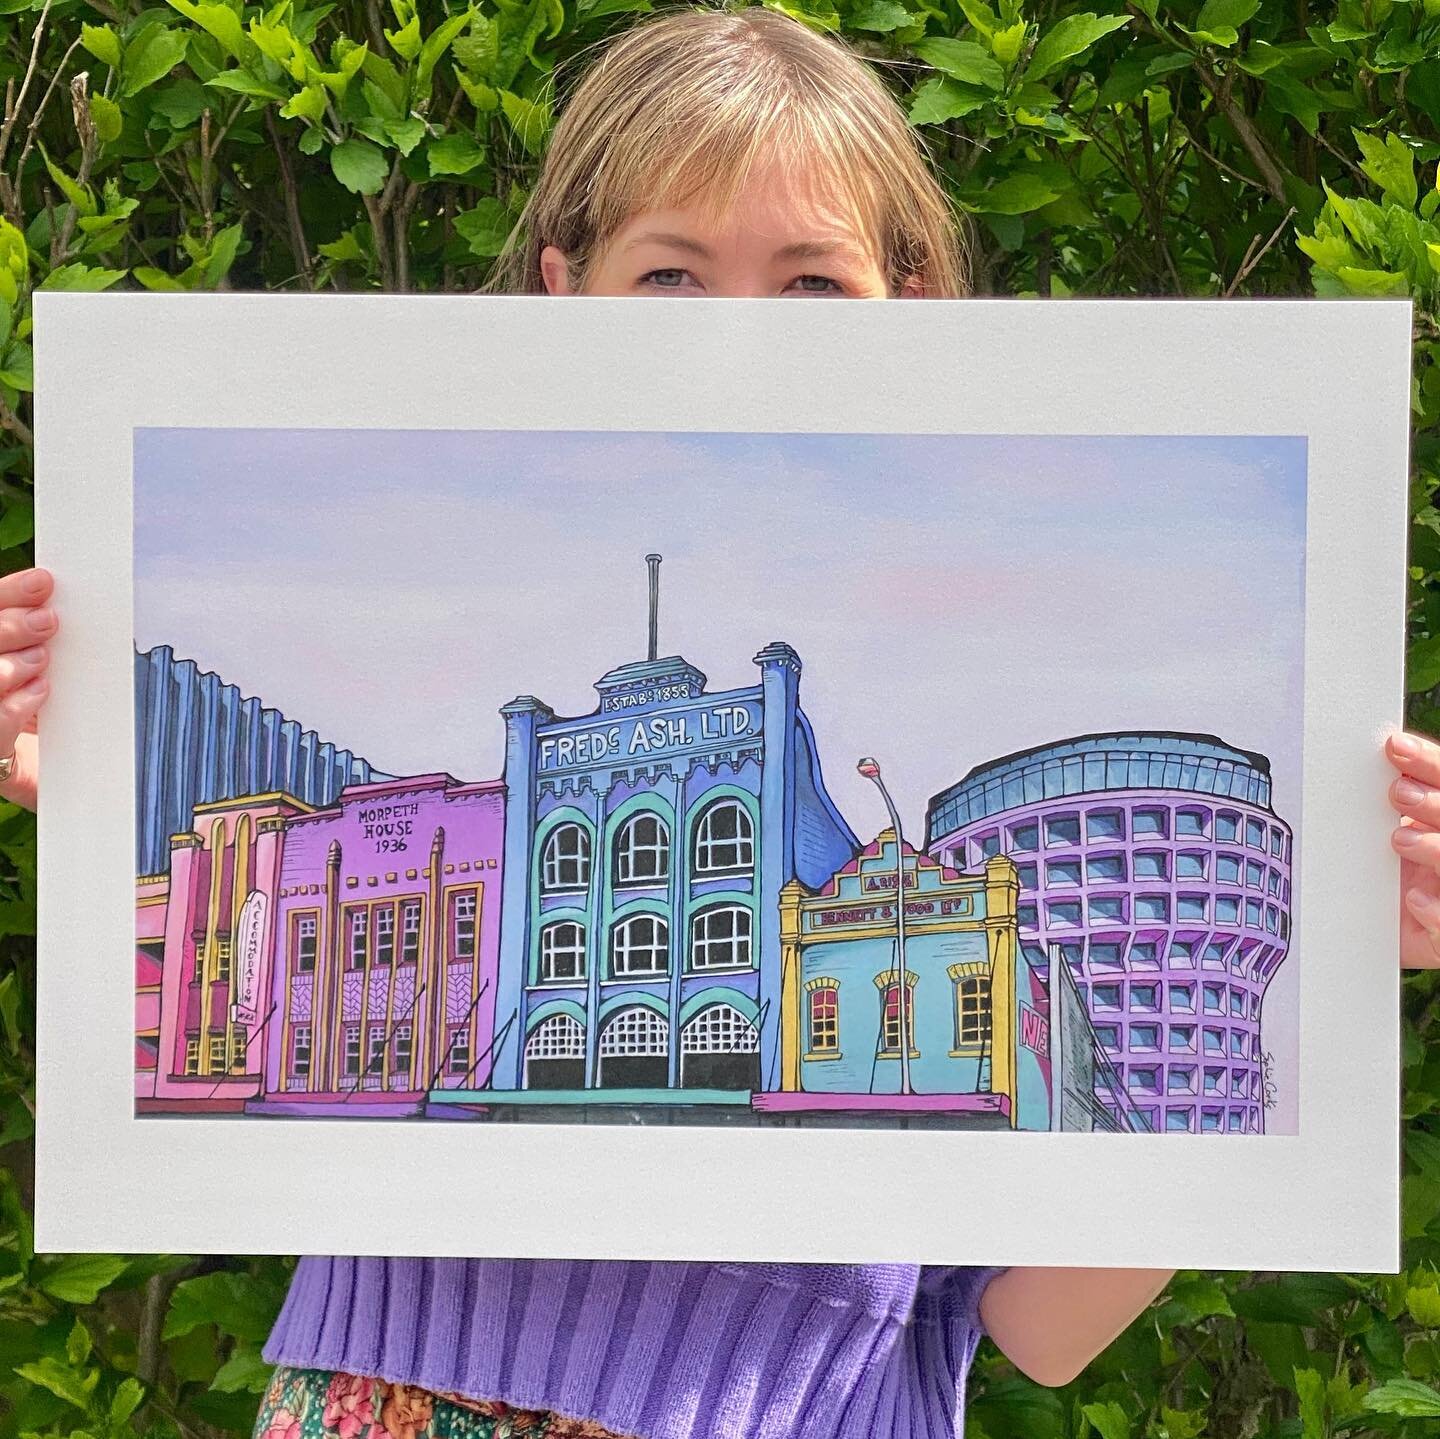 Newcastle - you have some really cool buildings! One of my favourite prints. 🥰
.
.
@citynewcastle.au #newcastlensw #newcastleaustralia #newcastle #urbanlandscape #urbanlandscapepainting #architecture_hunter #sophiecorks #countryaustralianartist #reg